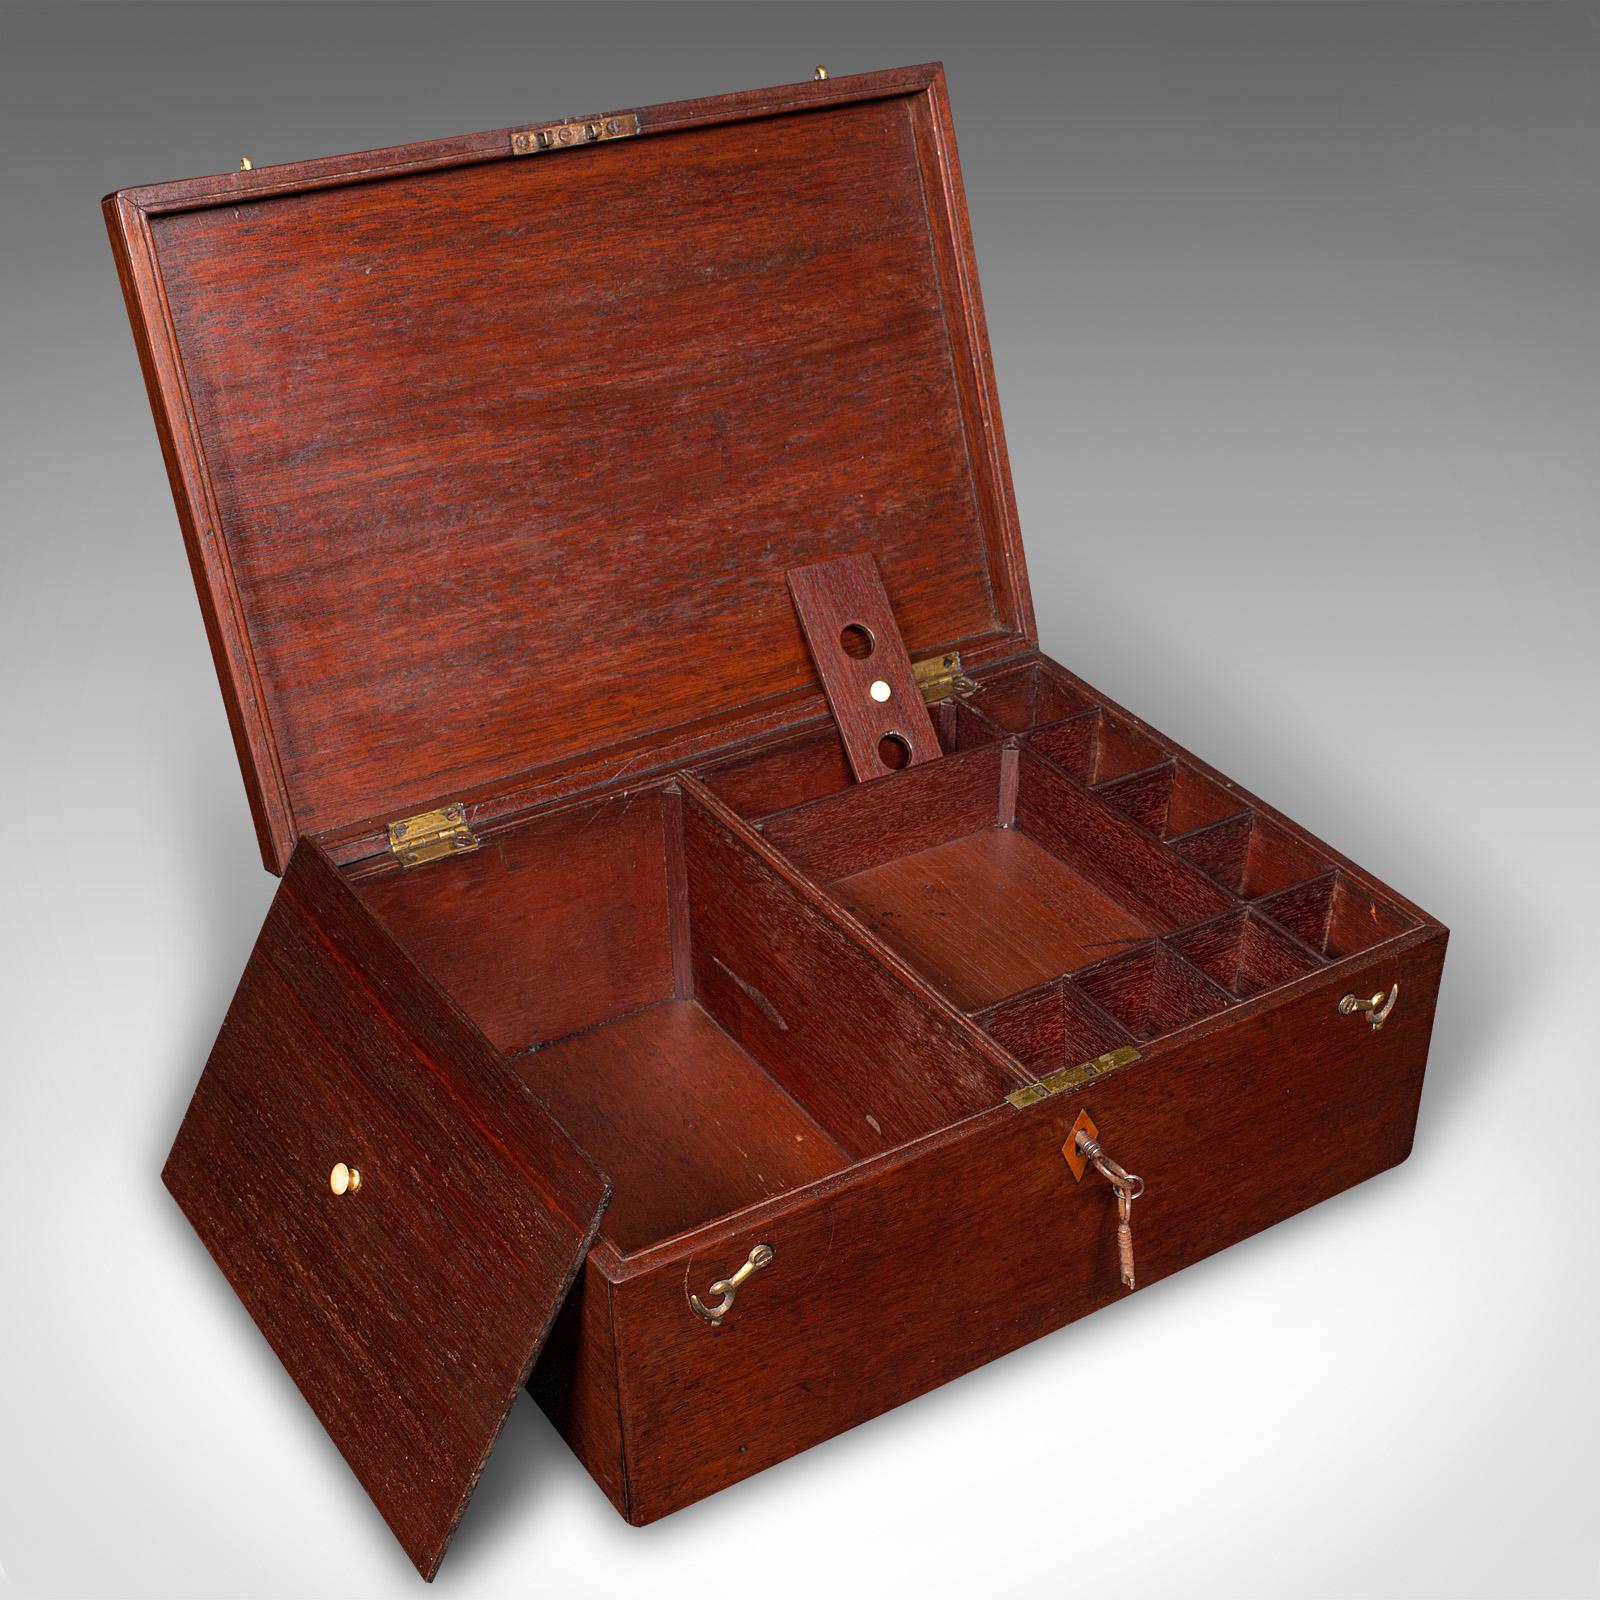 Wood Antique Travelling Jewellery Salesman's Box, English Carry Case, Victorian, 1850 For Sale